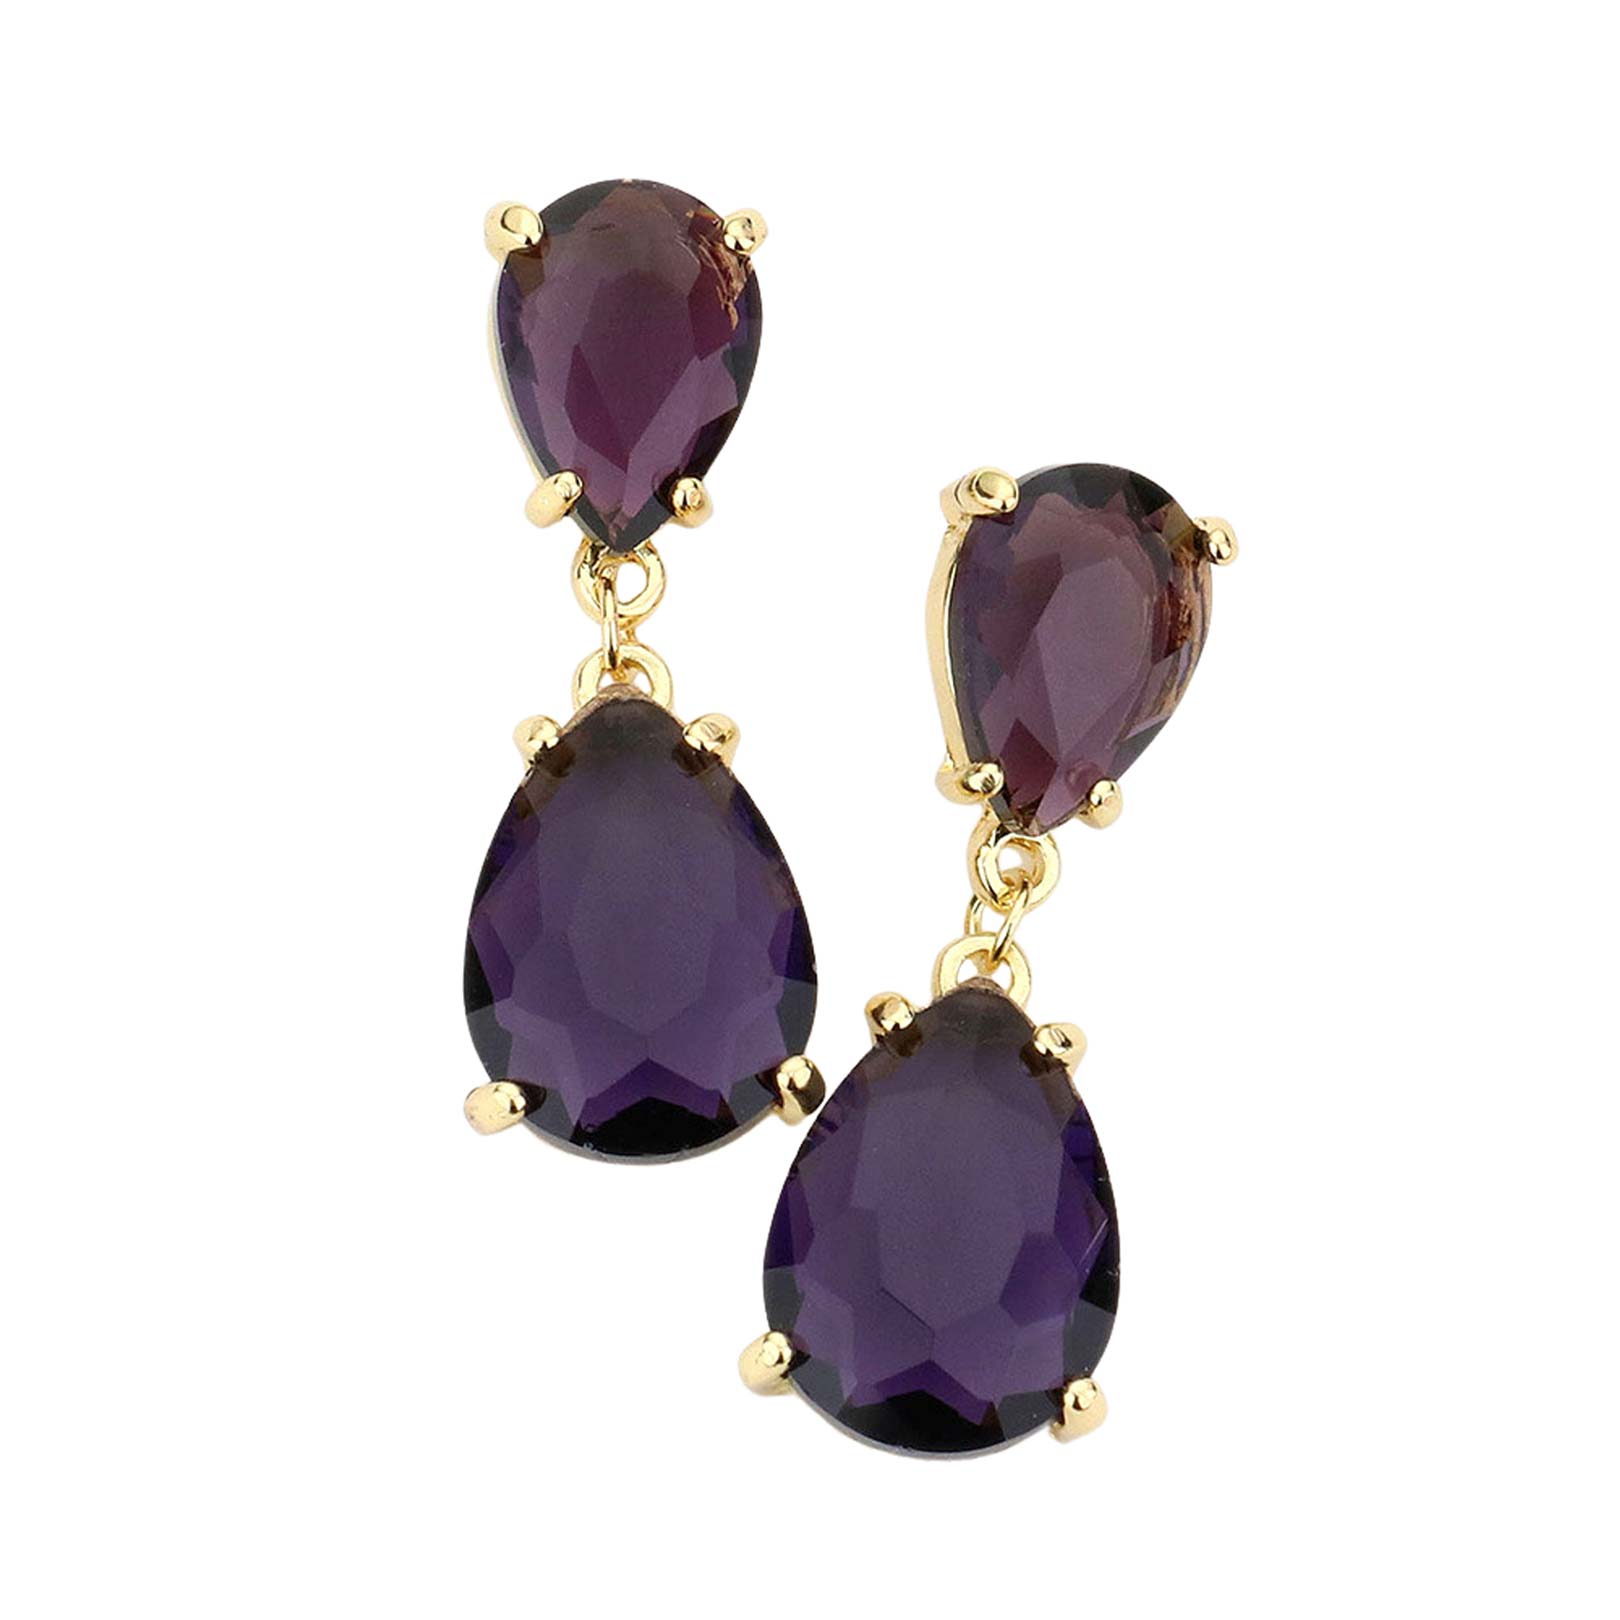 Amethyst Double Teardrop Link Dangle Evening Earrings, Beautiful teardrop-shaped dangle drop earrings. These elegant, comfortable earrings can be worn all day to dress up any outfit. Wear a pop of shine to complete your ensemble with a classy style. The perfect accessory for adding just the right amount of shimmer and a touch of class to special events. Jewelry that fits your lifestyle and makes your moments awesome!